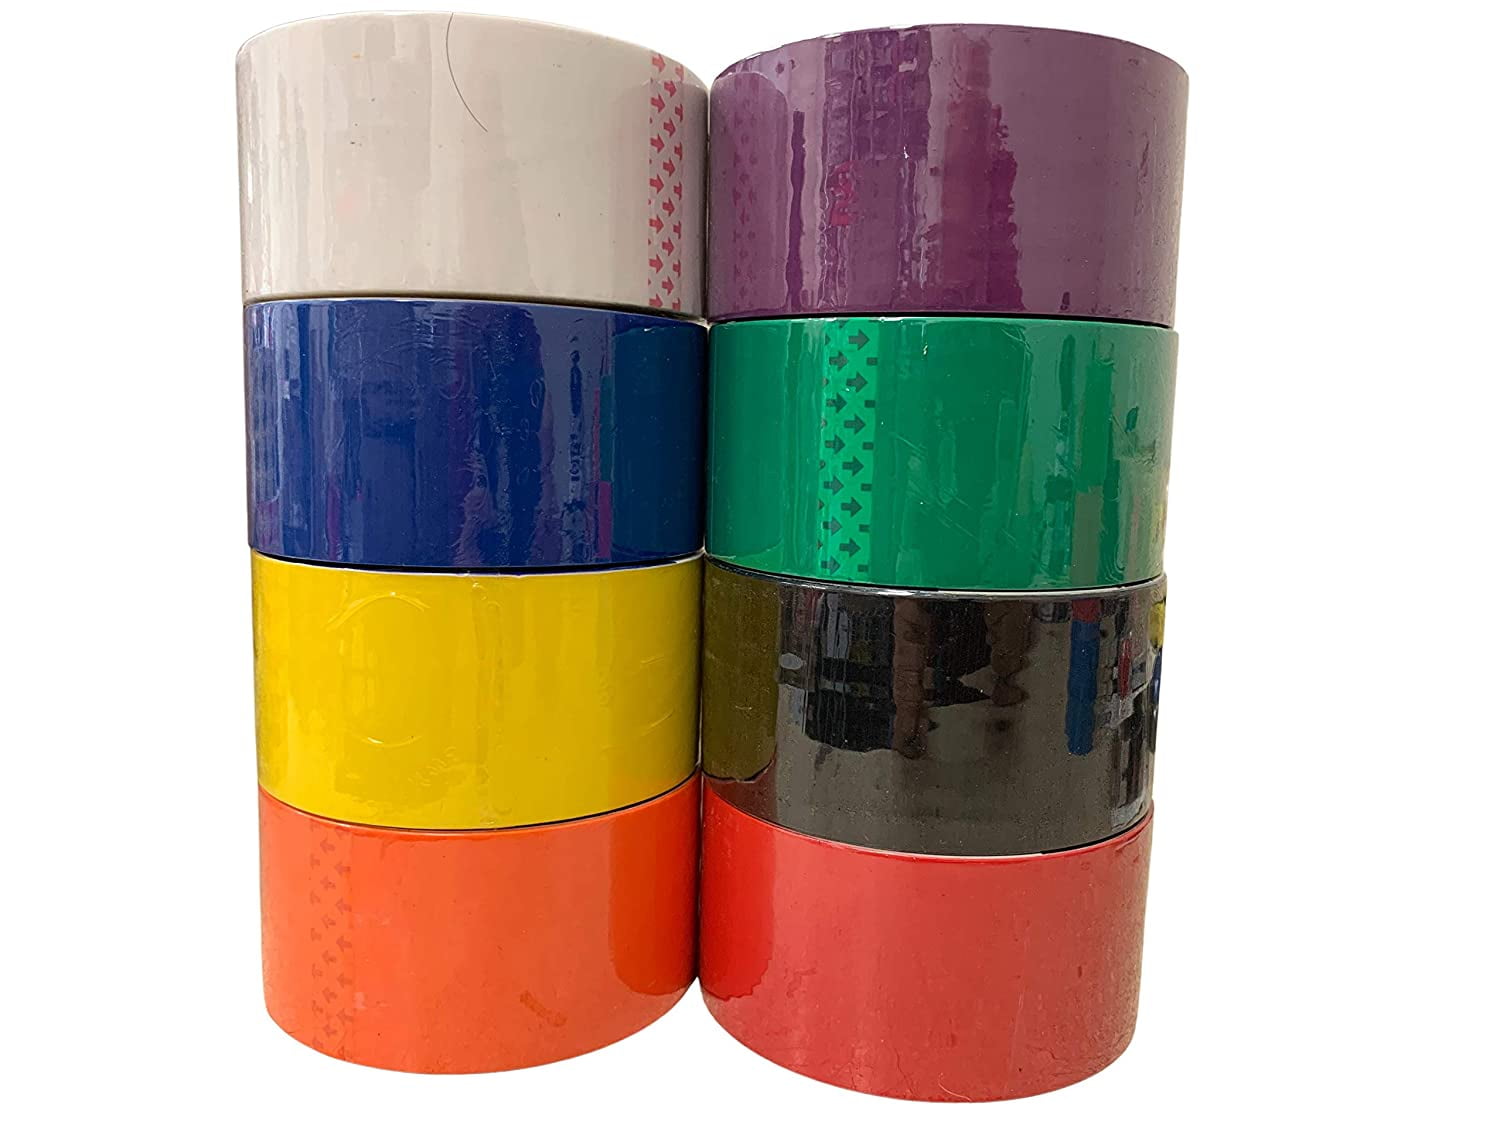 Colored Packing Tape - MK Packaging